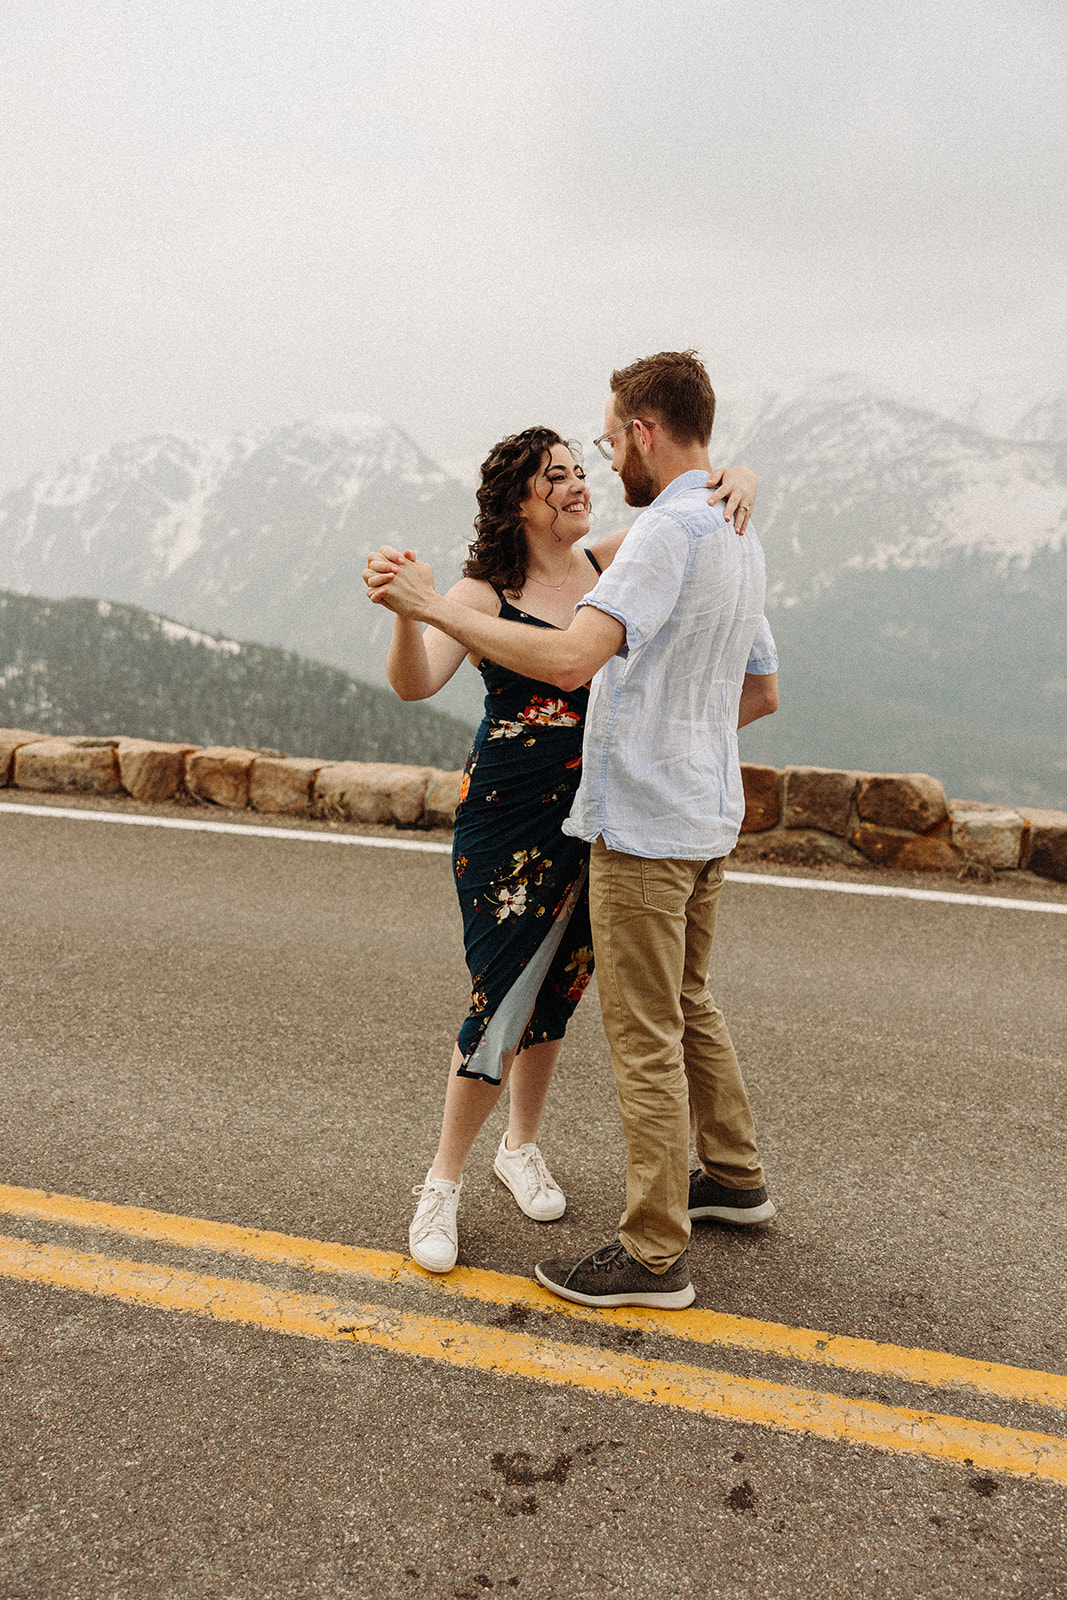 A man and a woman dancing on a road 